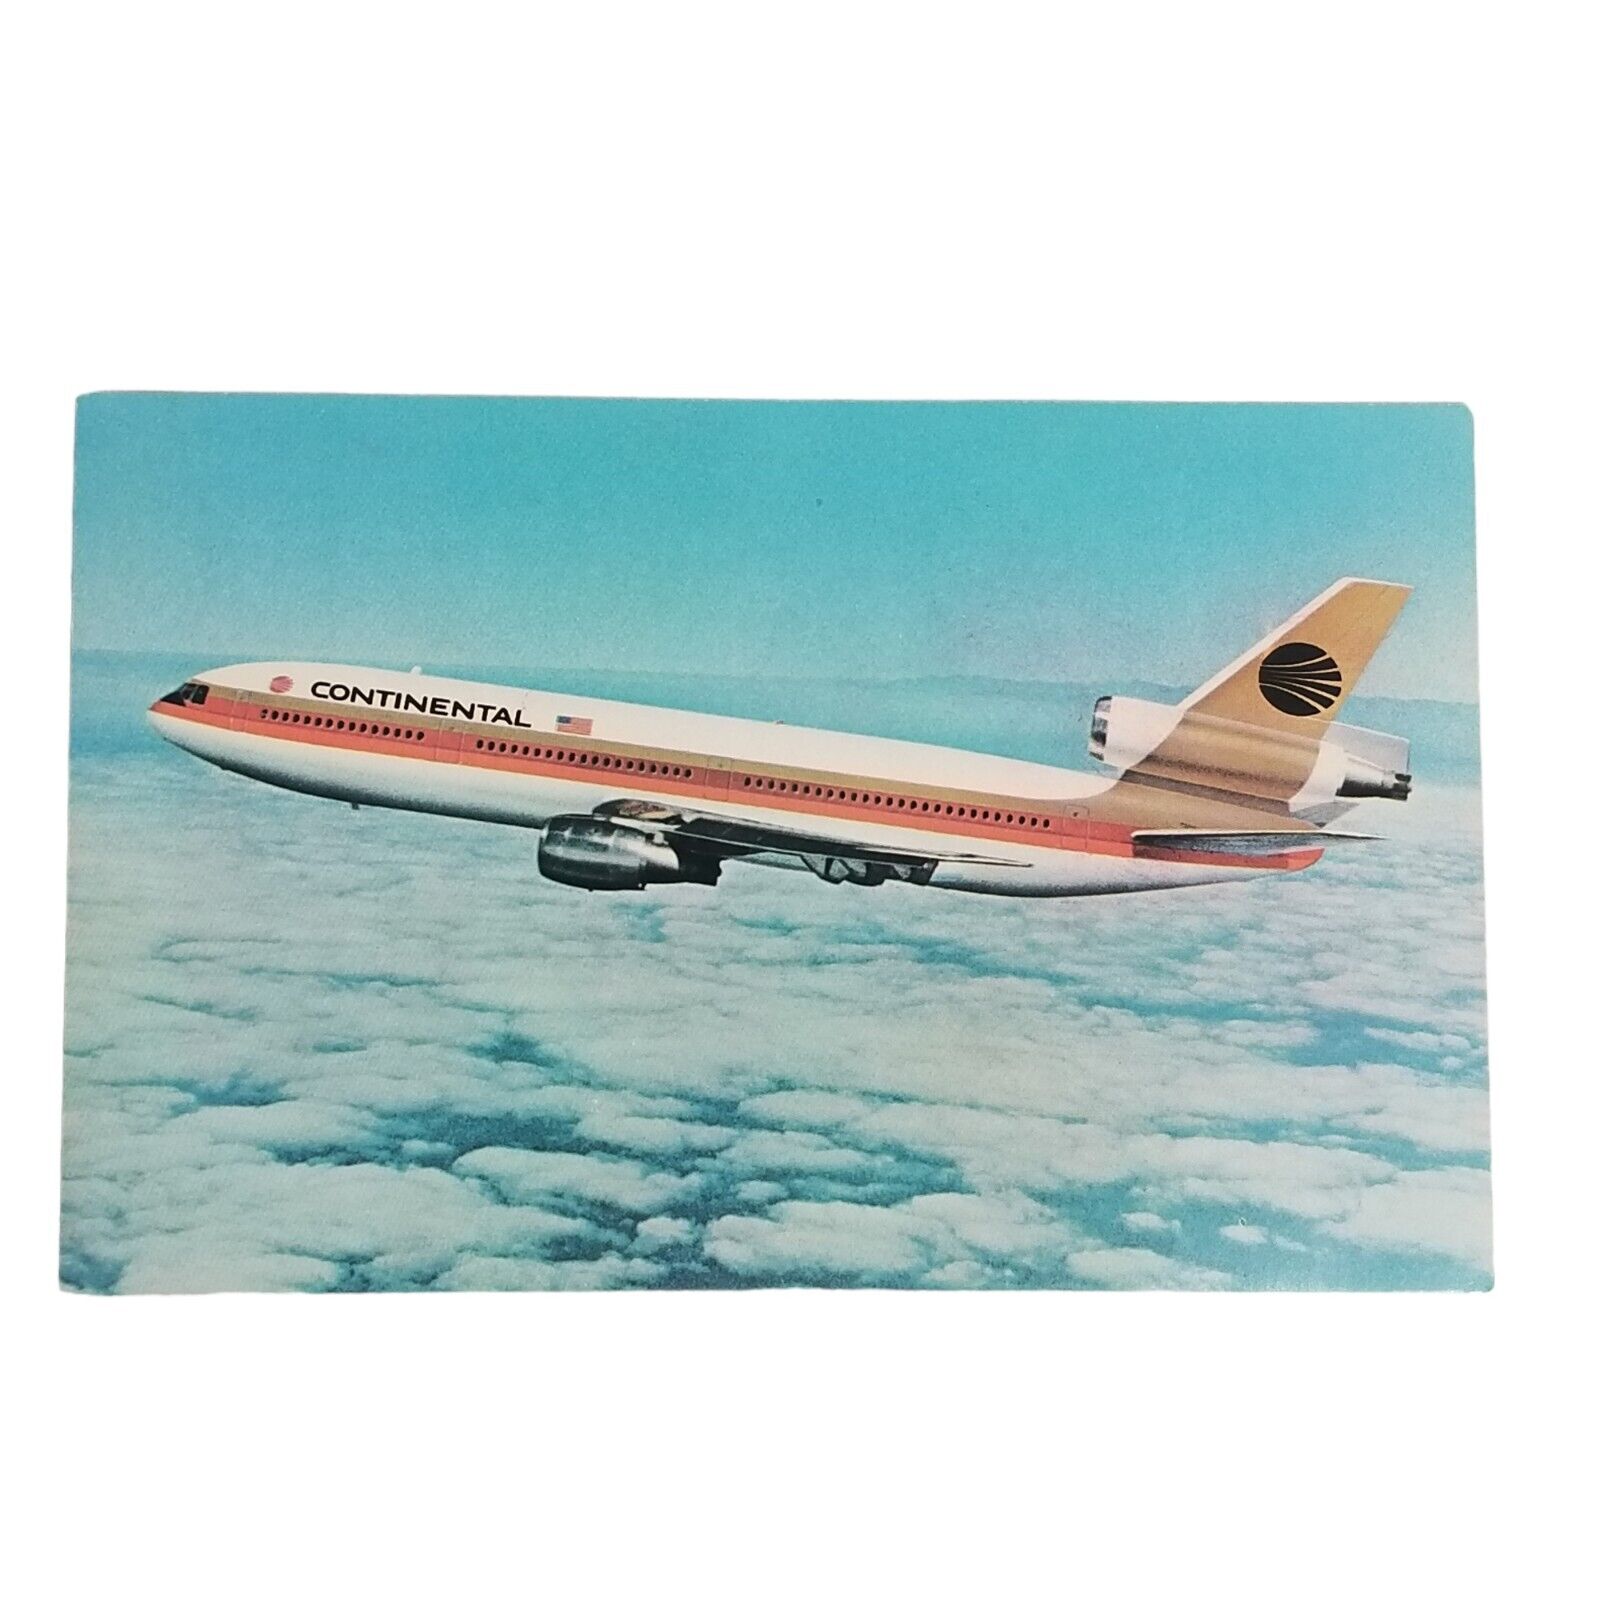 Continental Airlines DC-10 Luxury Passenger Airplane in Flight Sky Clouds Vtg 